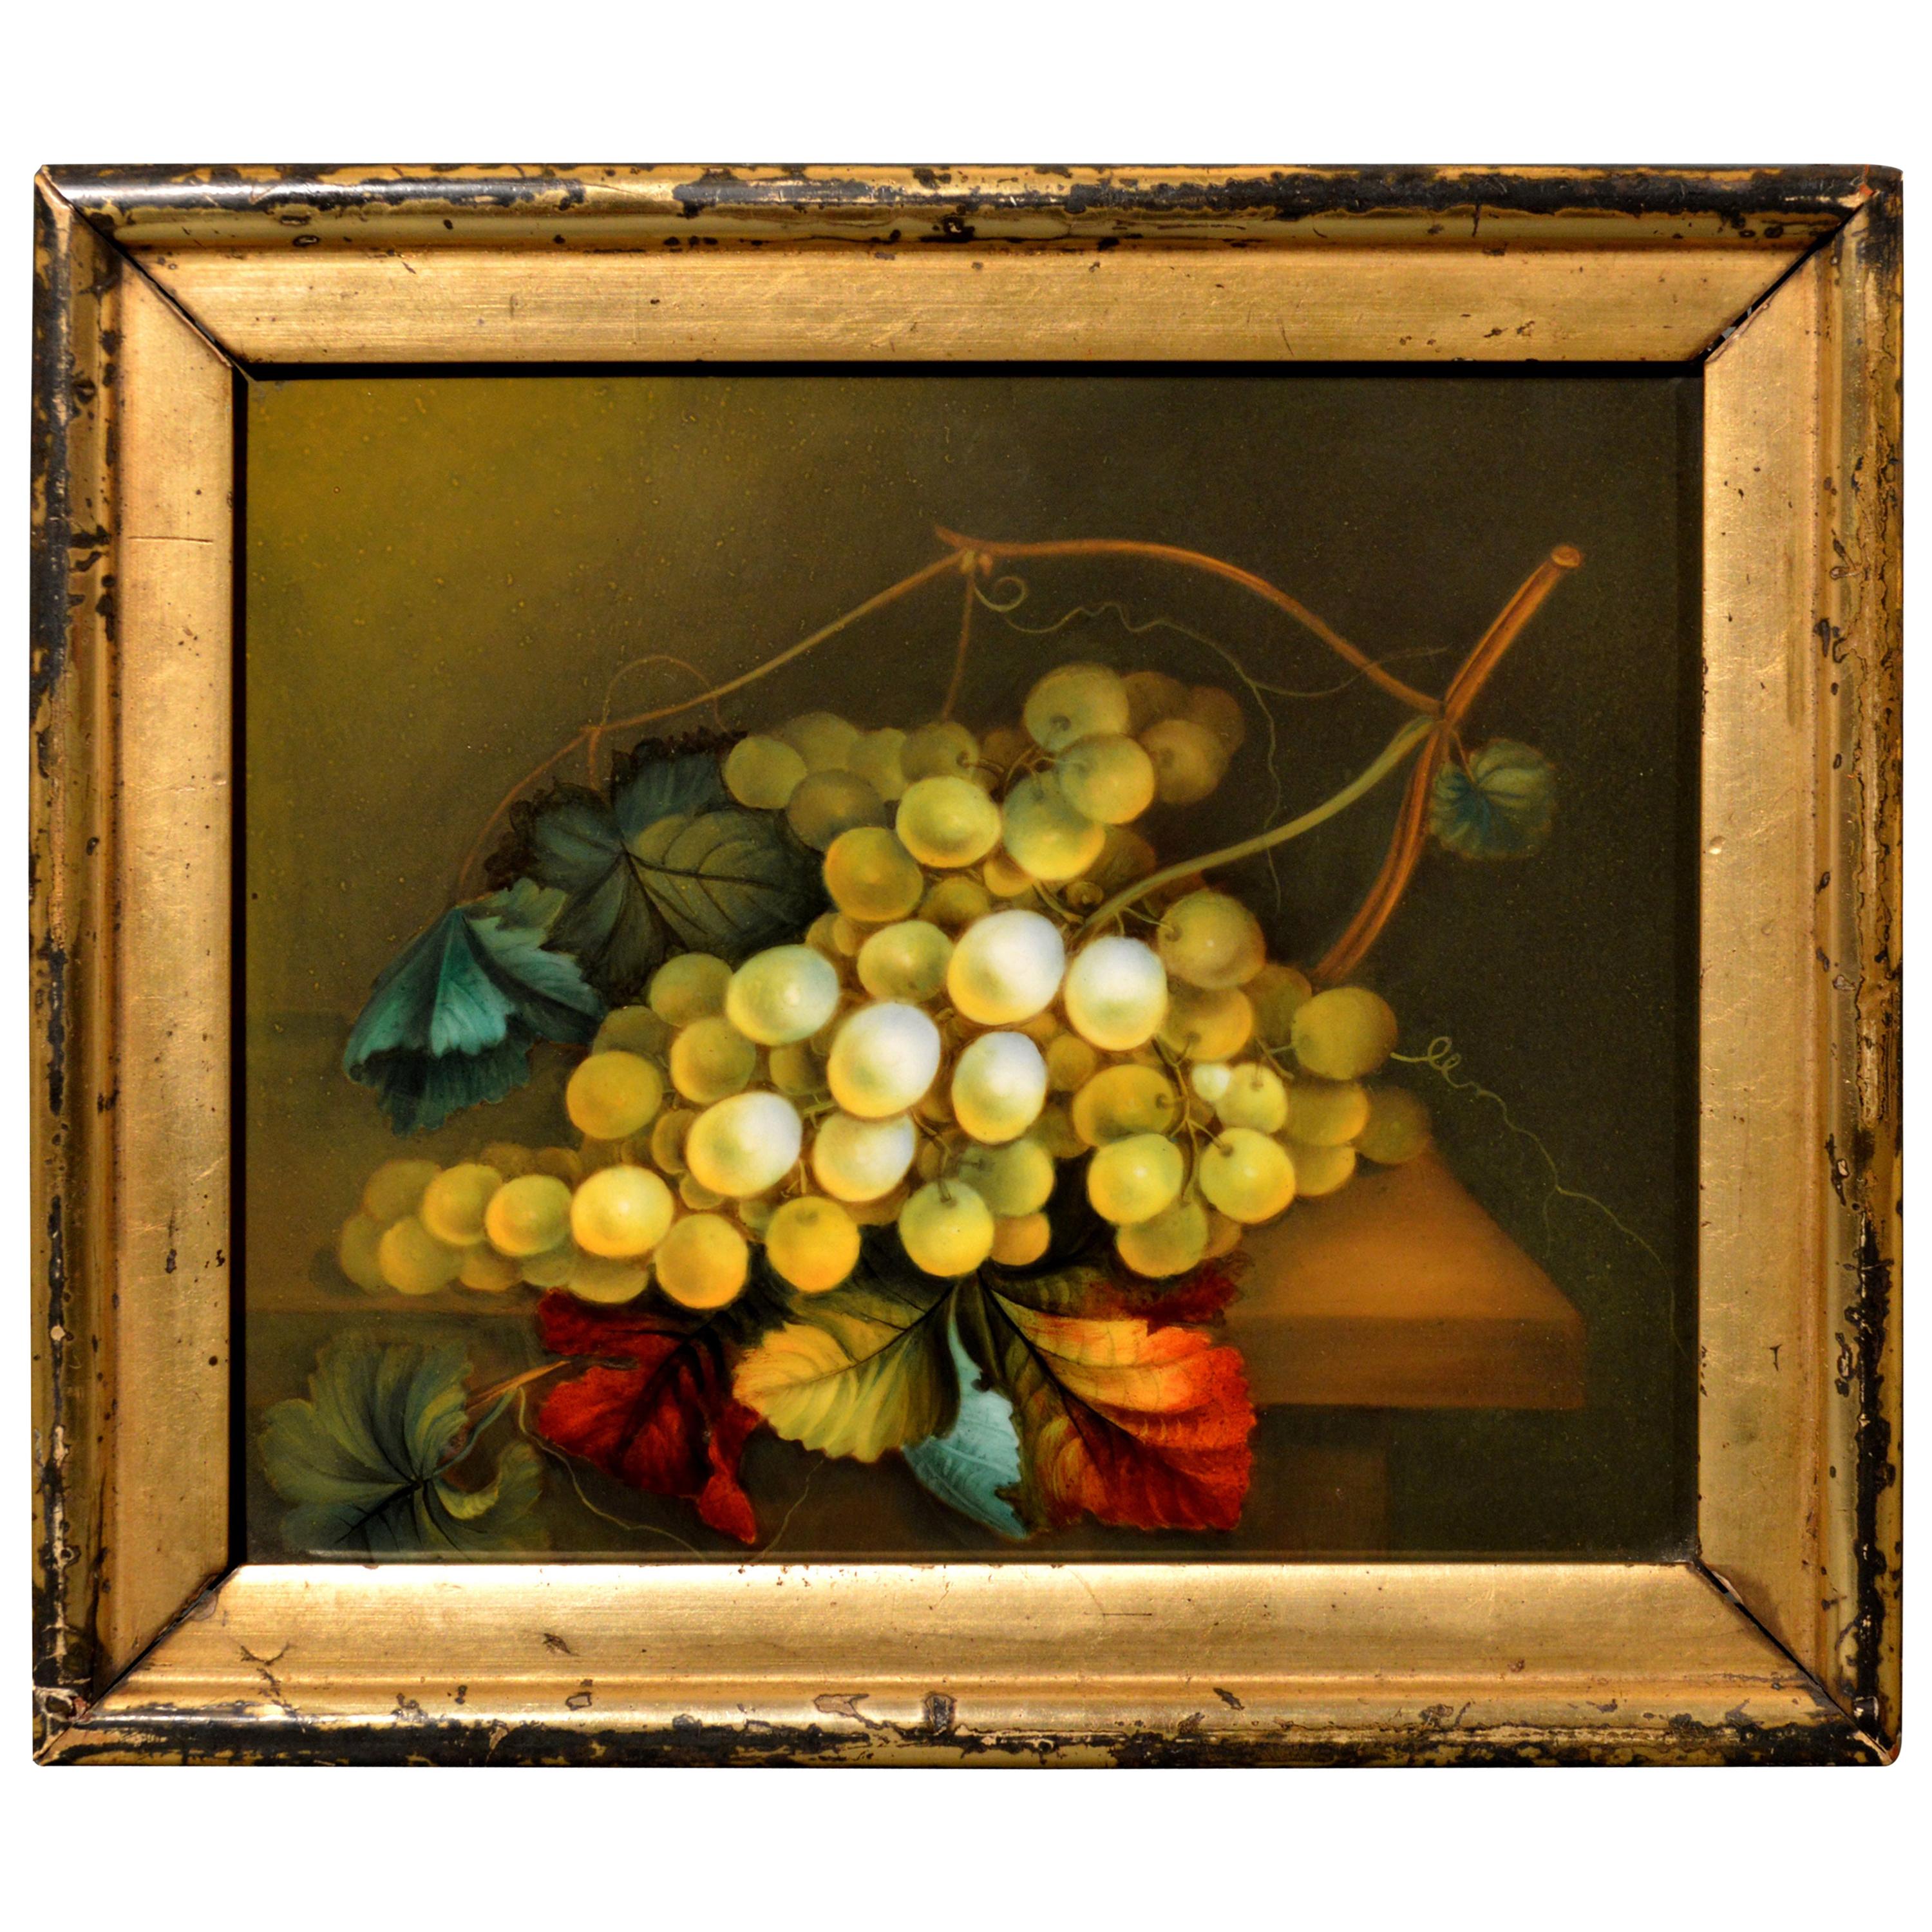 English Porcelain Still Life Plaque depicting Green Grapes on a Tabletop